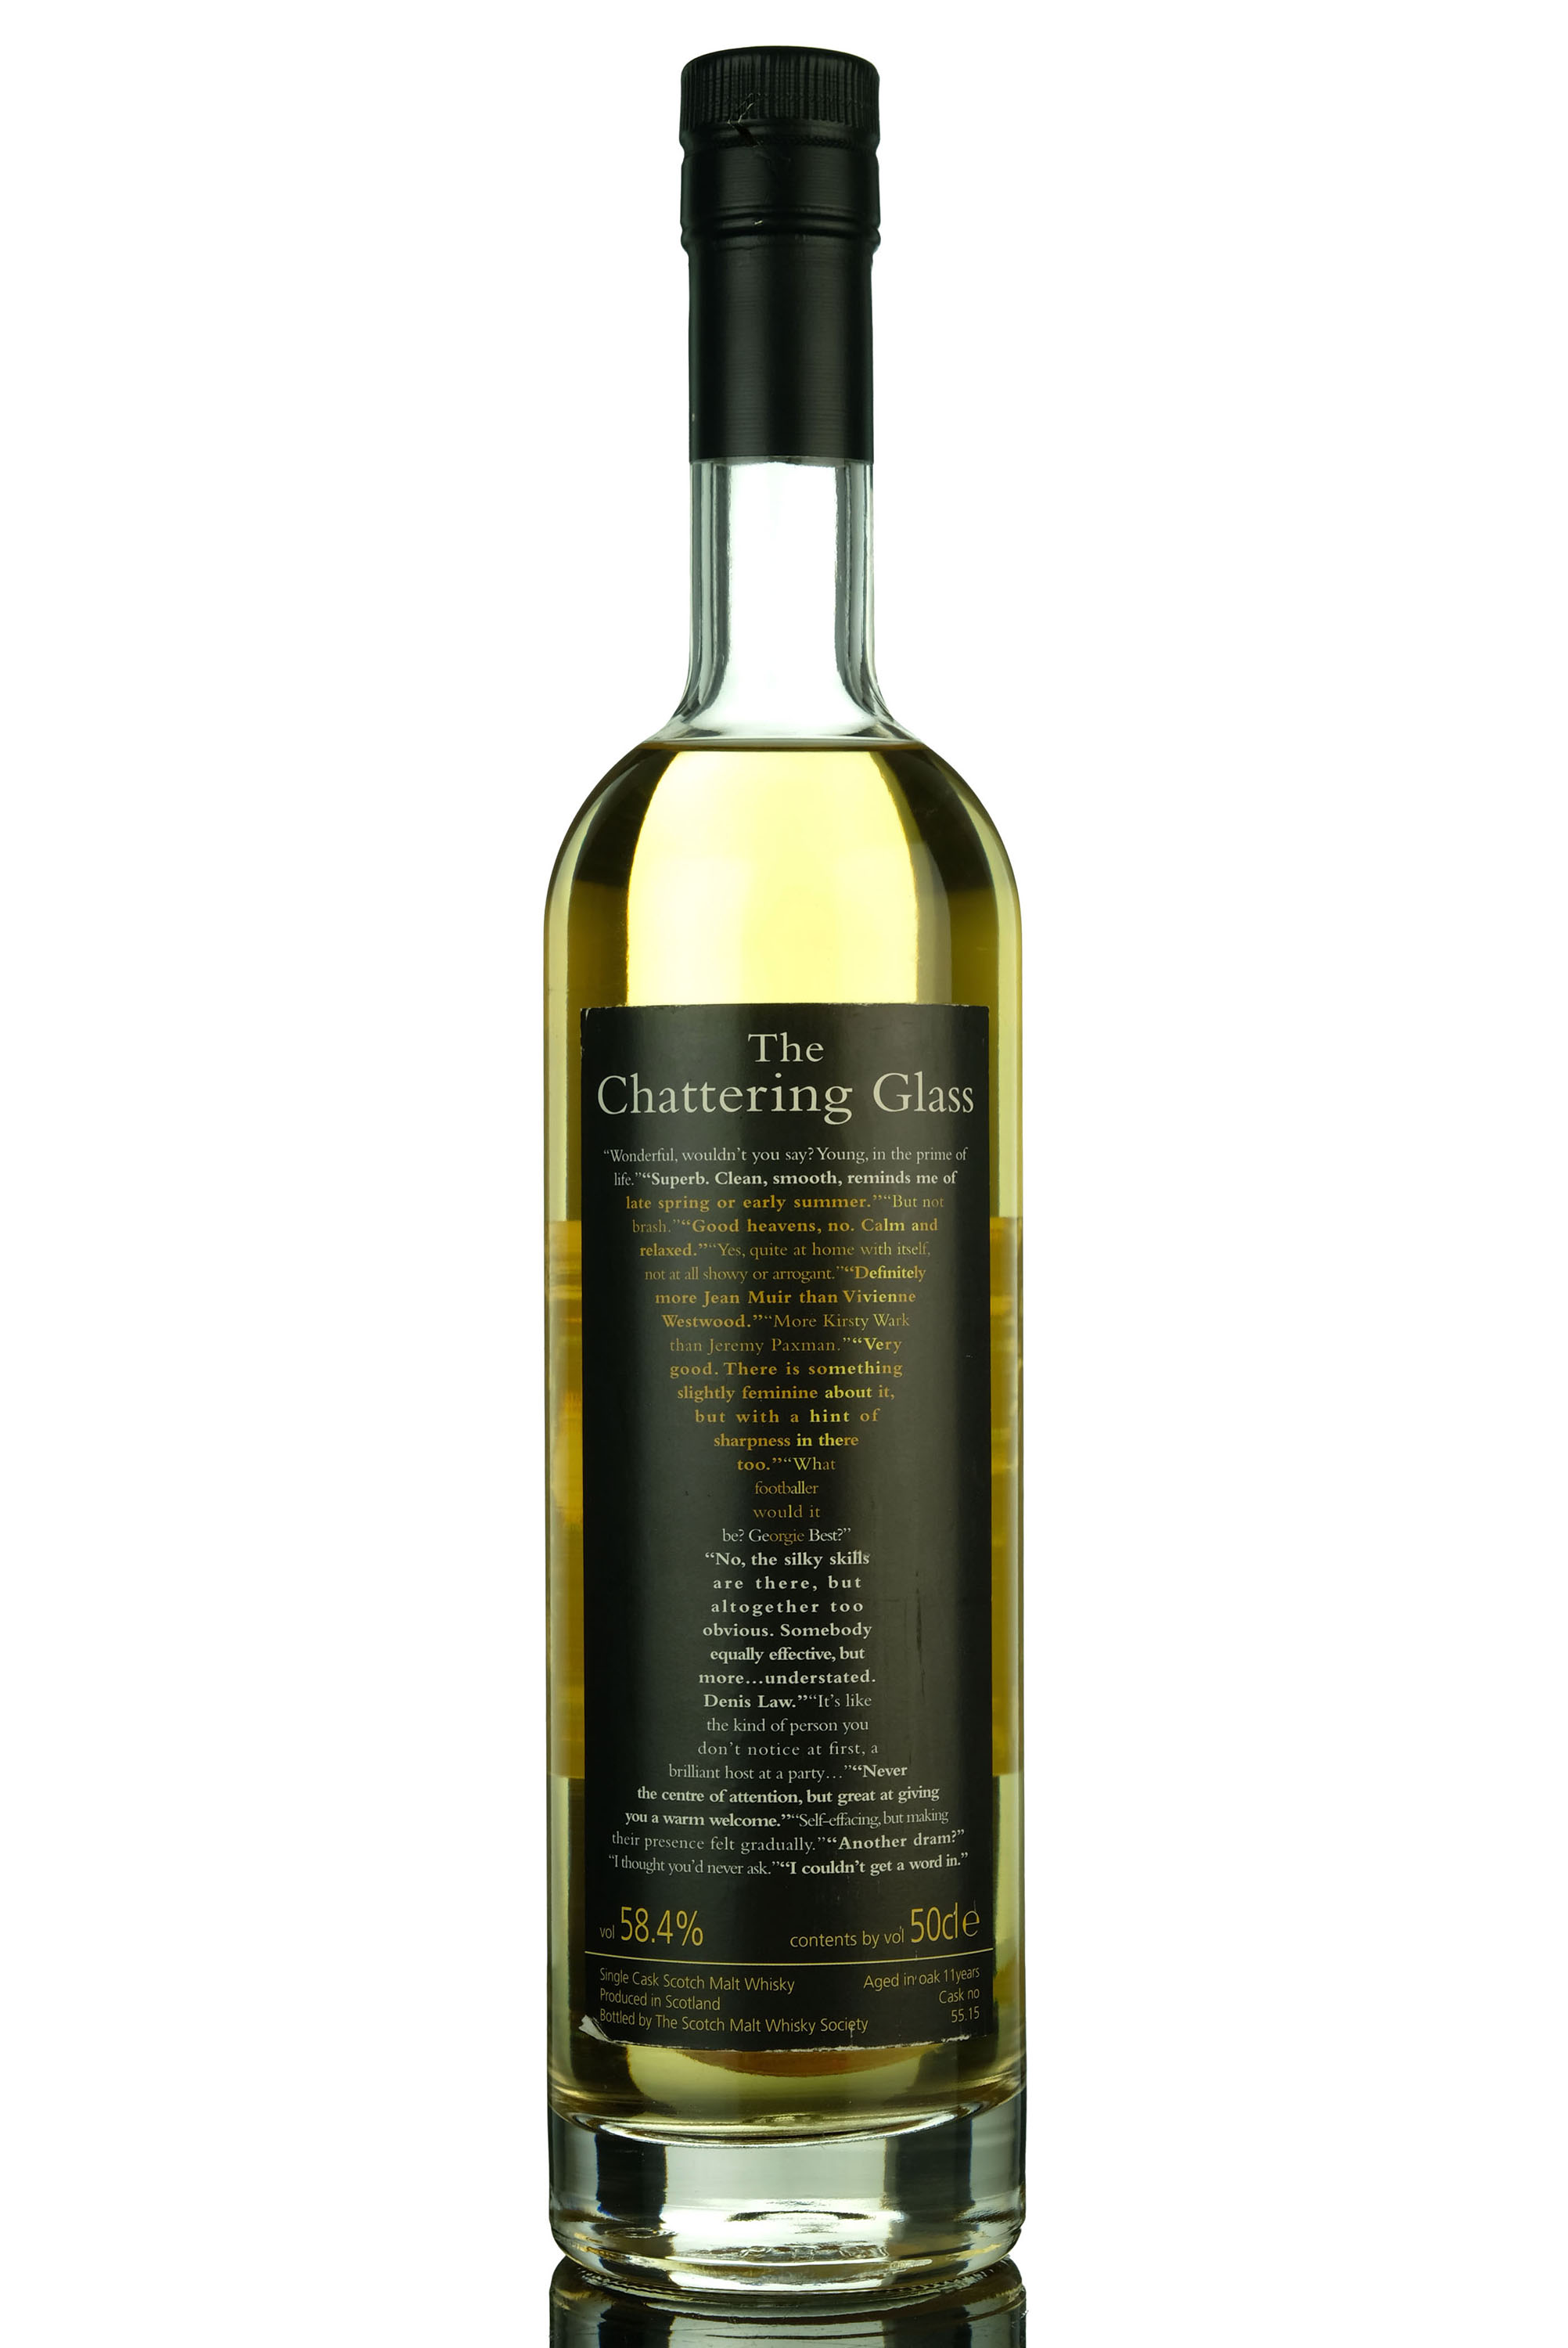 Royal Brackla 11 Year Old - SMWS 55.15 - The Chattering Glass